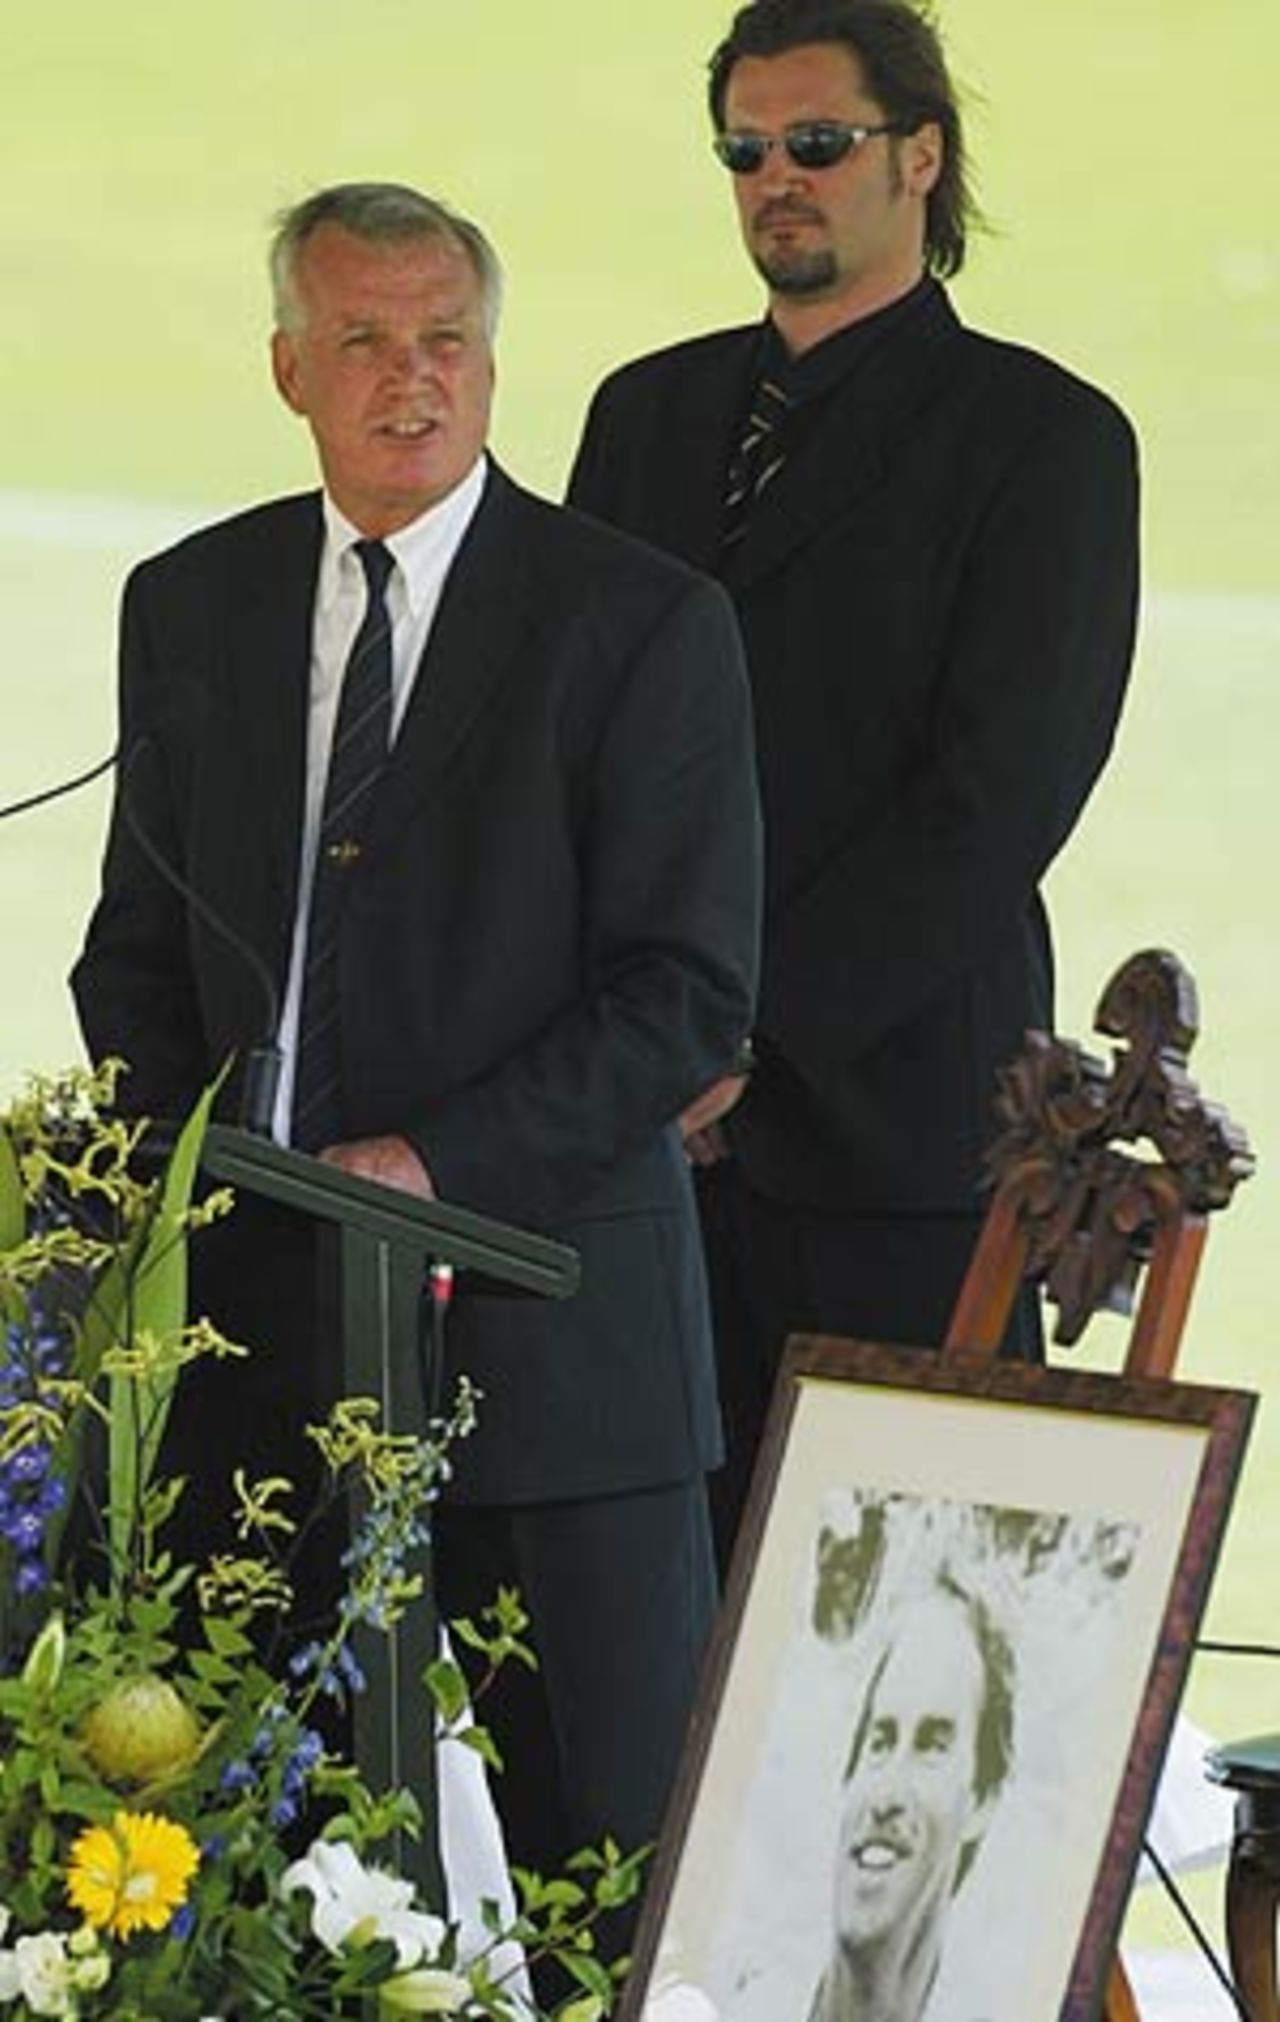 Terry Cranagh, the brother of David Hookes, delivers his speech, Adelaide, January 27, 2004